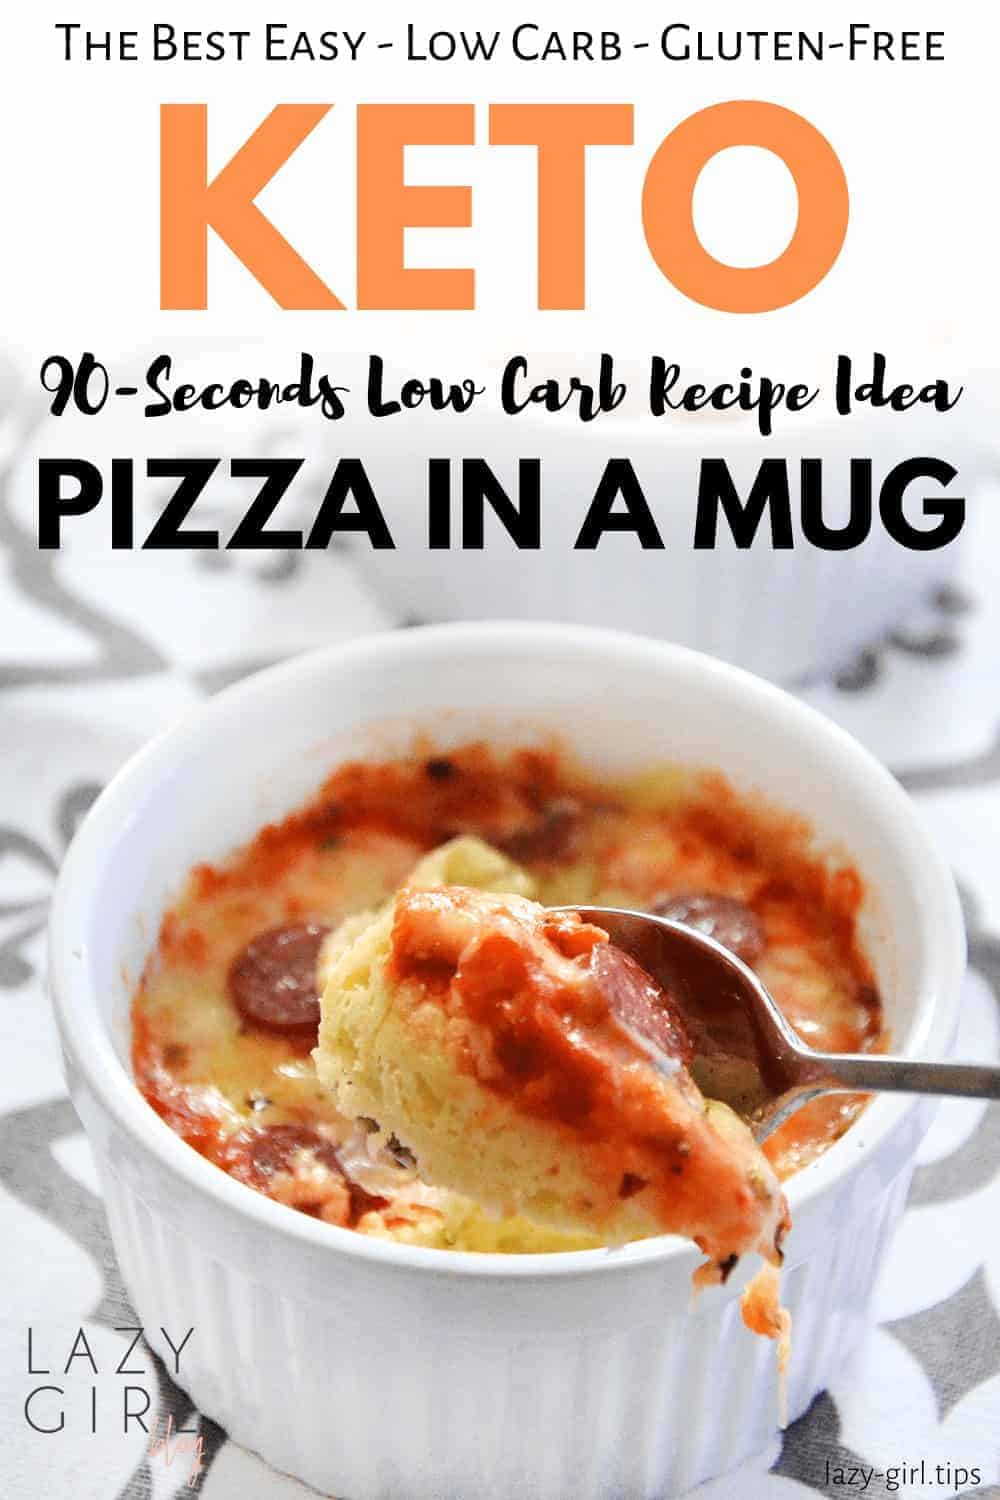 90-Seconds Keto Pizza In A Mug - Quick And Easy Low Carb Recipe Idea.